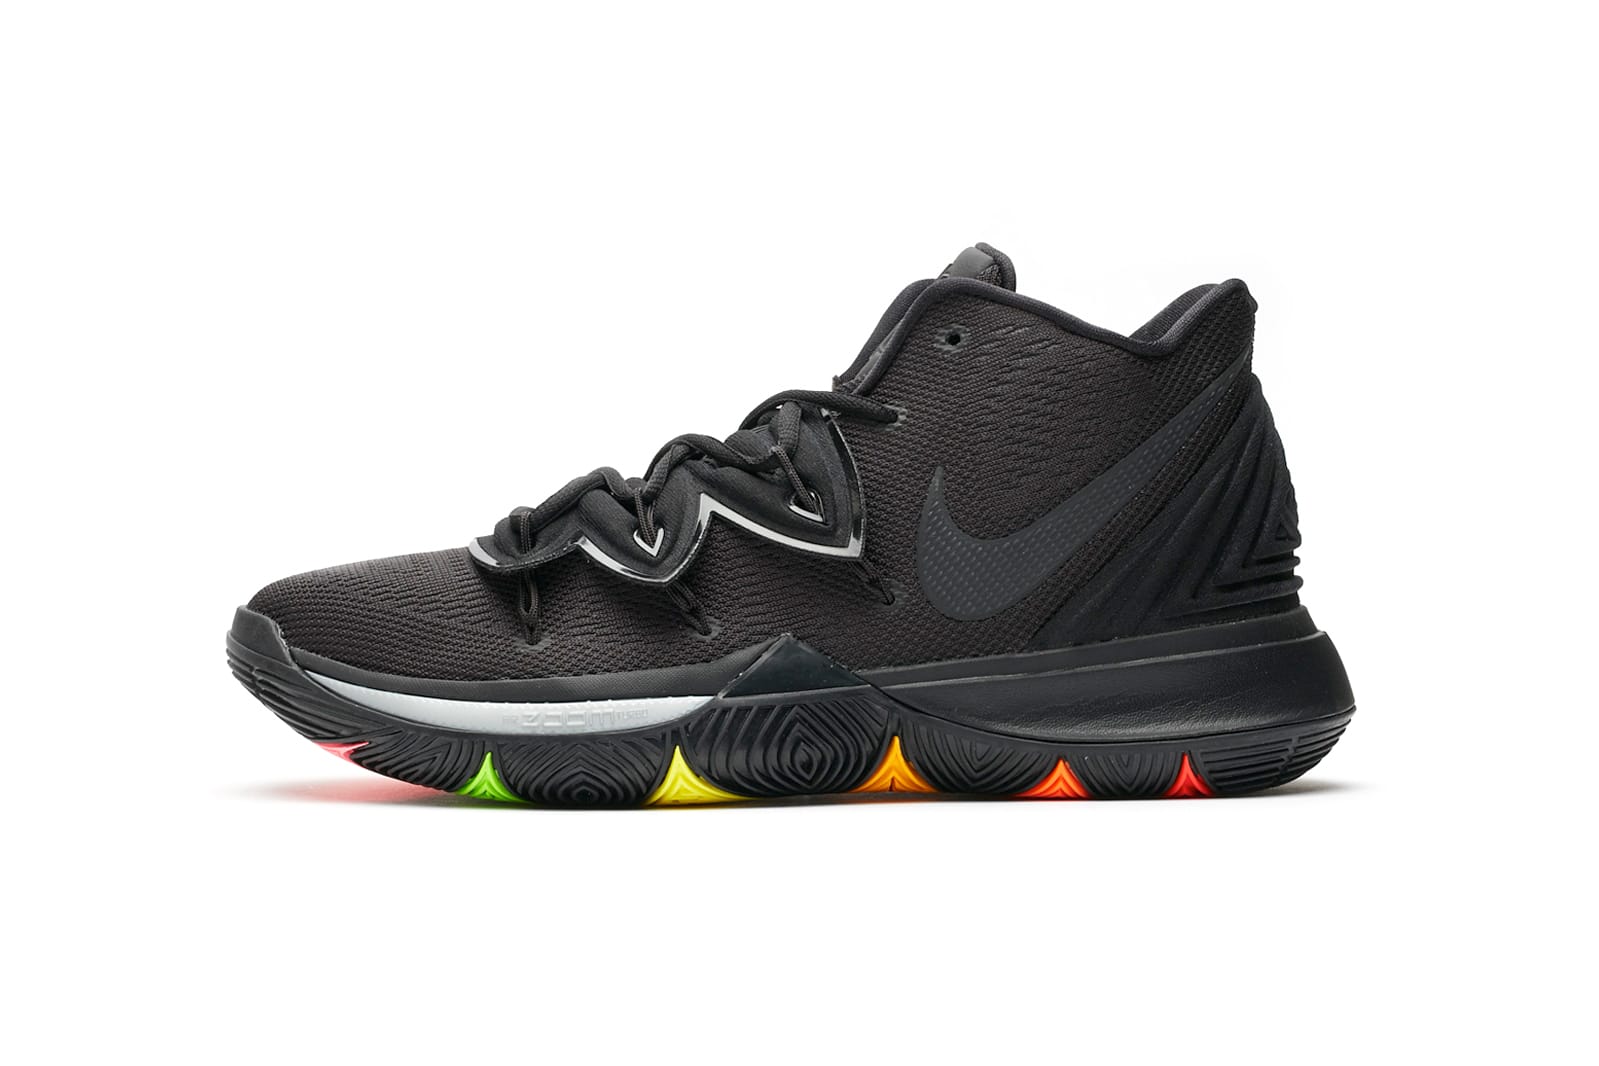 Nike Kyrie 5 Gets a Black Revamp With 